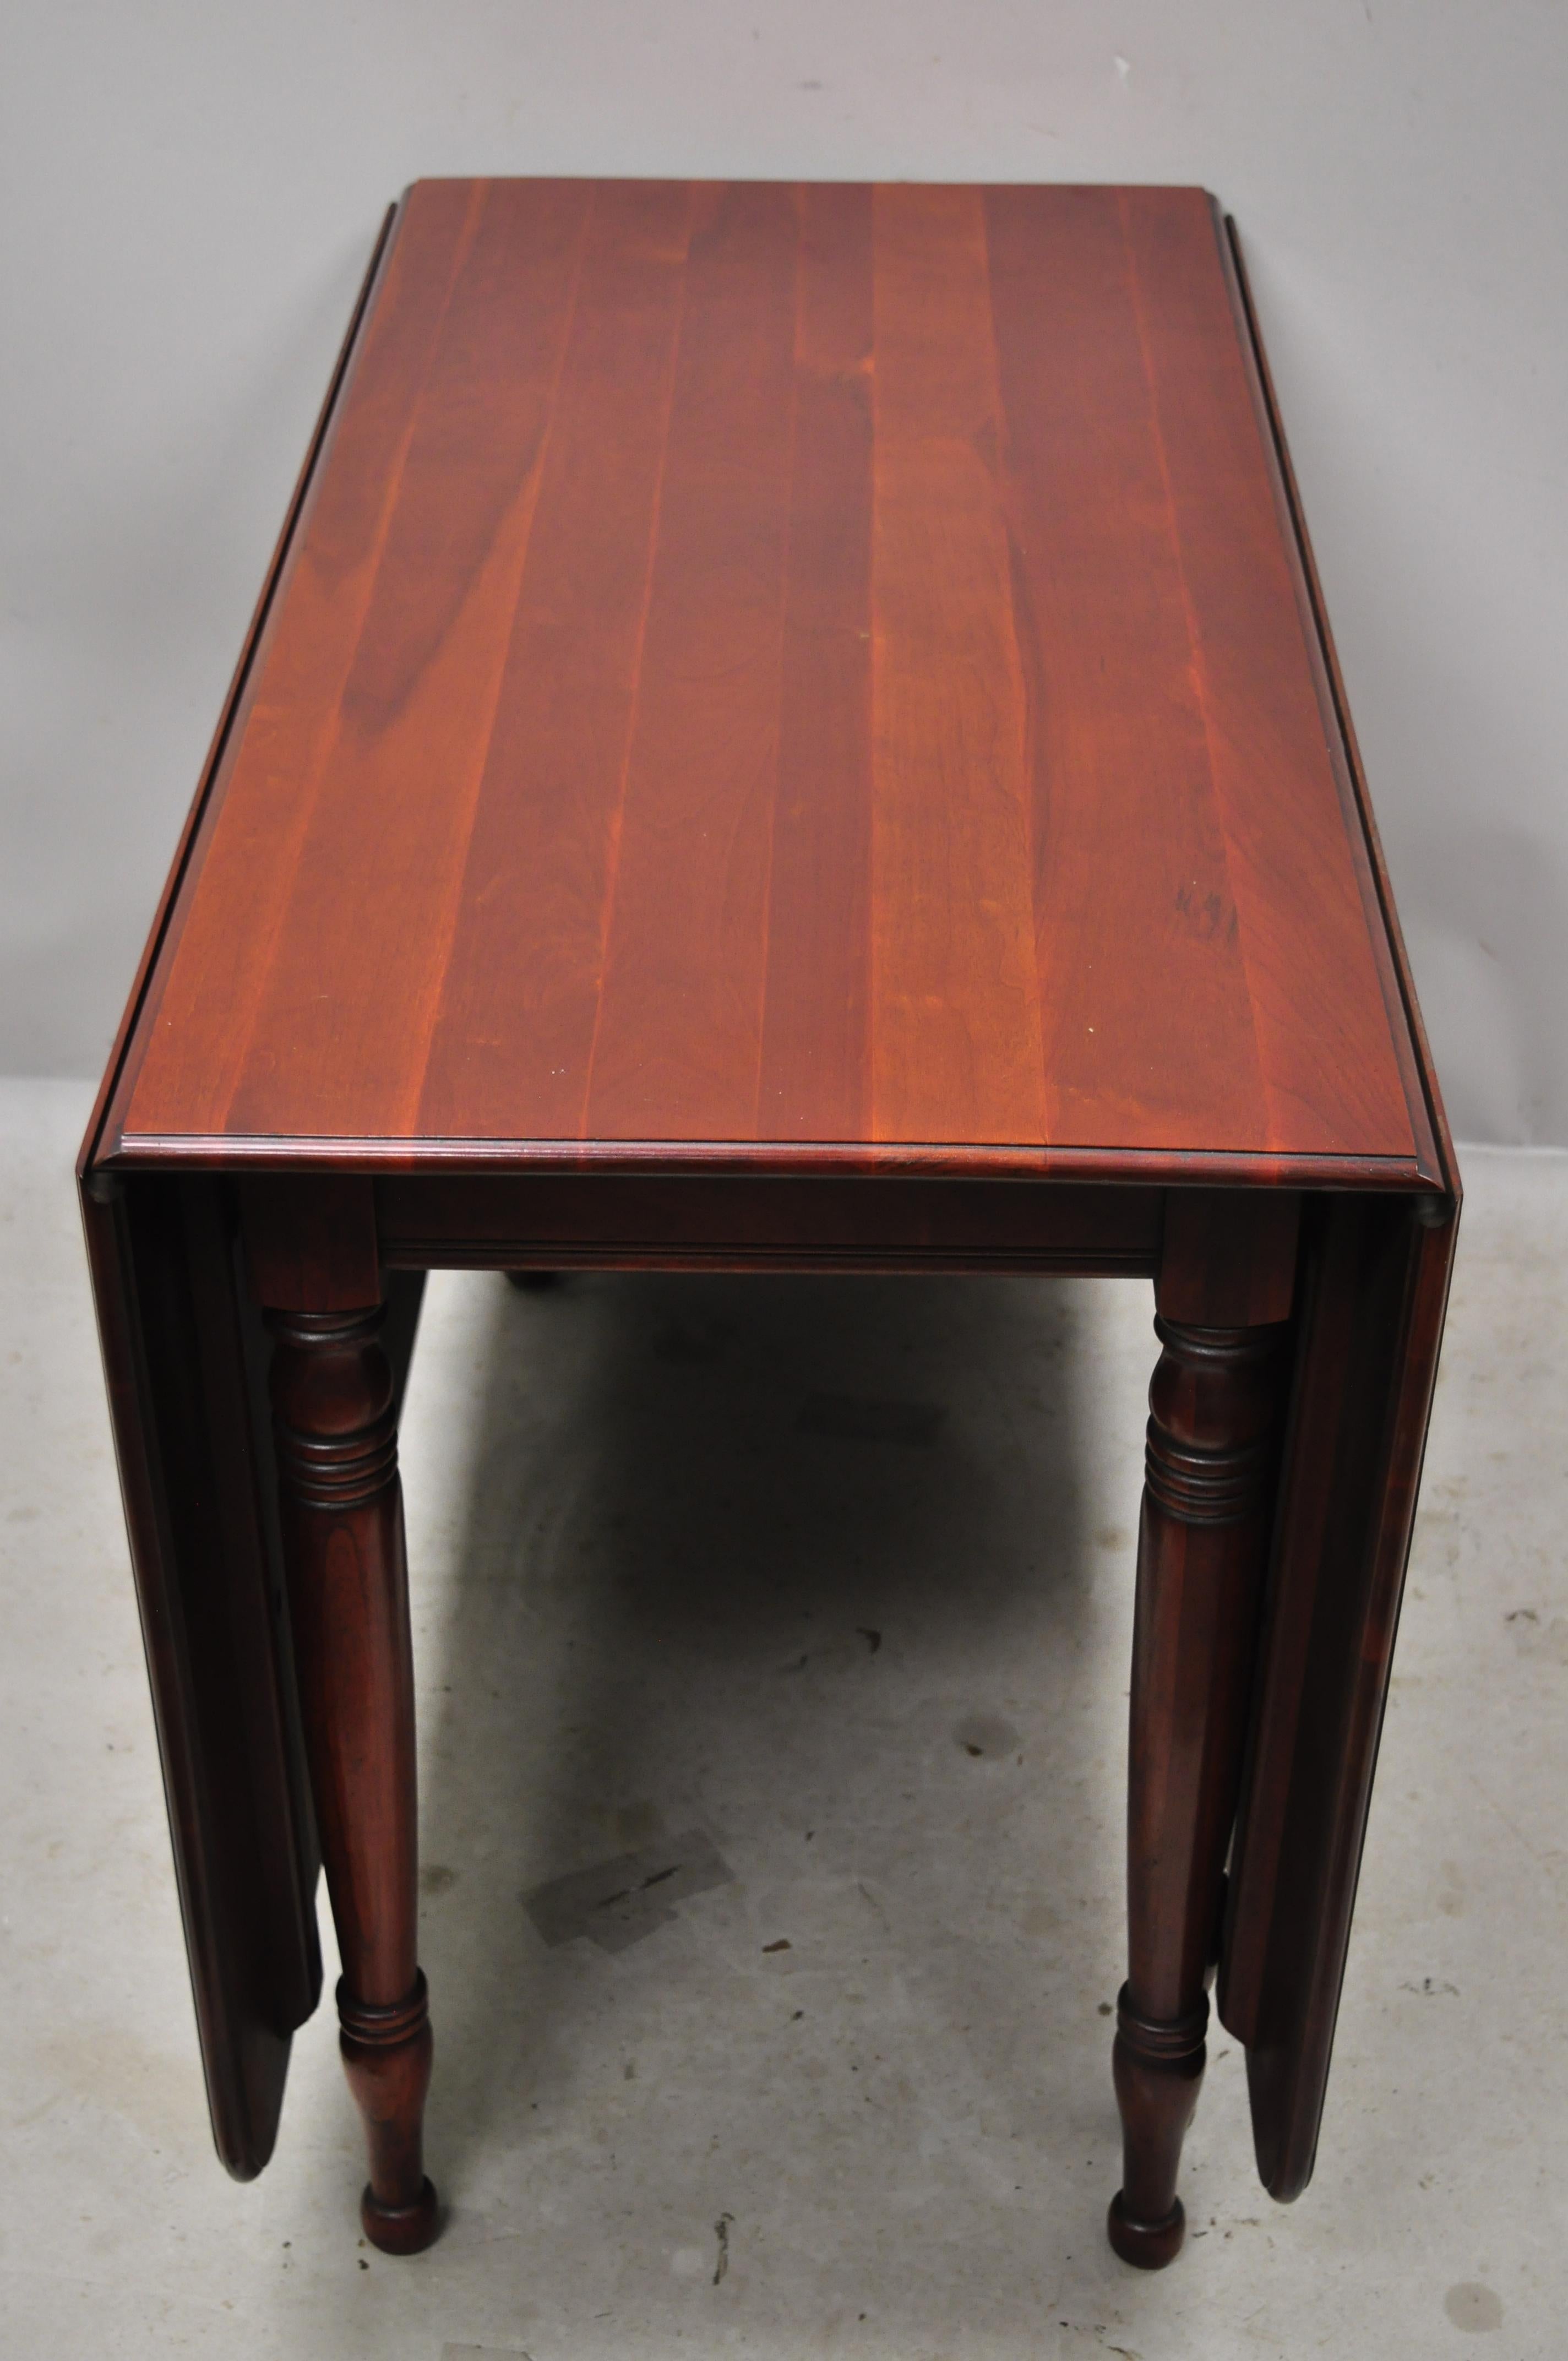 Pennsylvania House Mt. Vernon solid cherrywood vintage drop-leaf dining table. Item features 2 drop-leaf sides, turn carved legs, solid wood construction, beautiful wood grain, original stamp, quality American craftsmanship, great style and form,